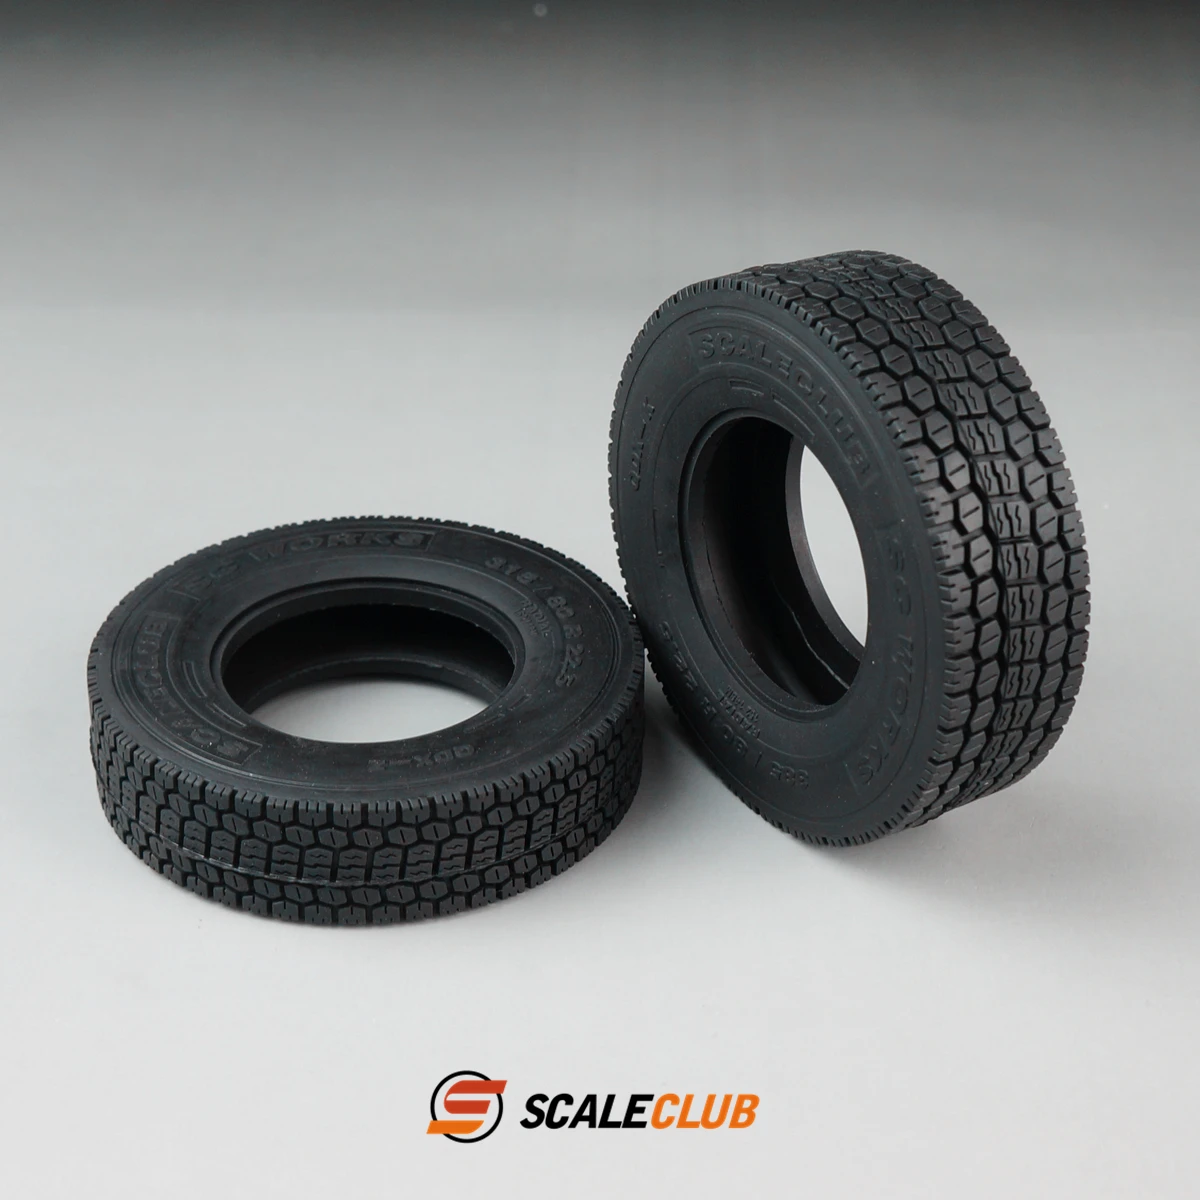 

Scaleclub 1/14 Truck Simulation Road Tires are Suitable for LESU Tamiya Scania MAN BENZ Volvo Hino and DIY Models